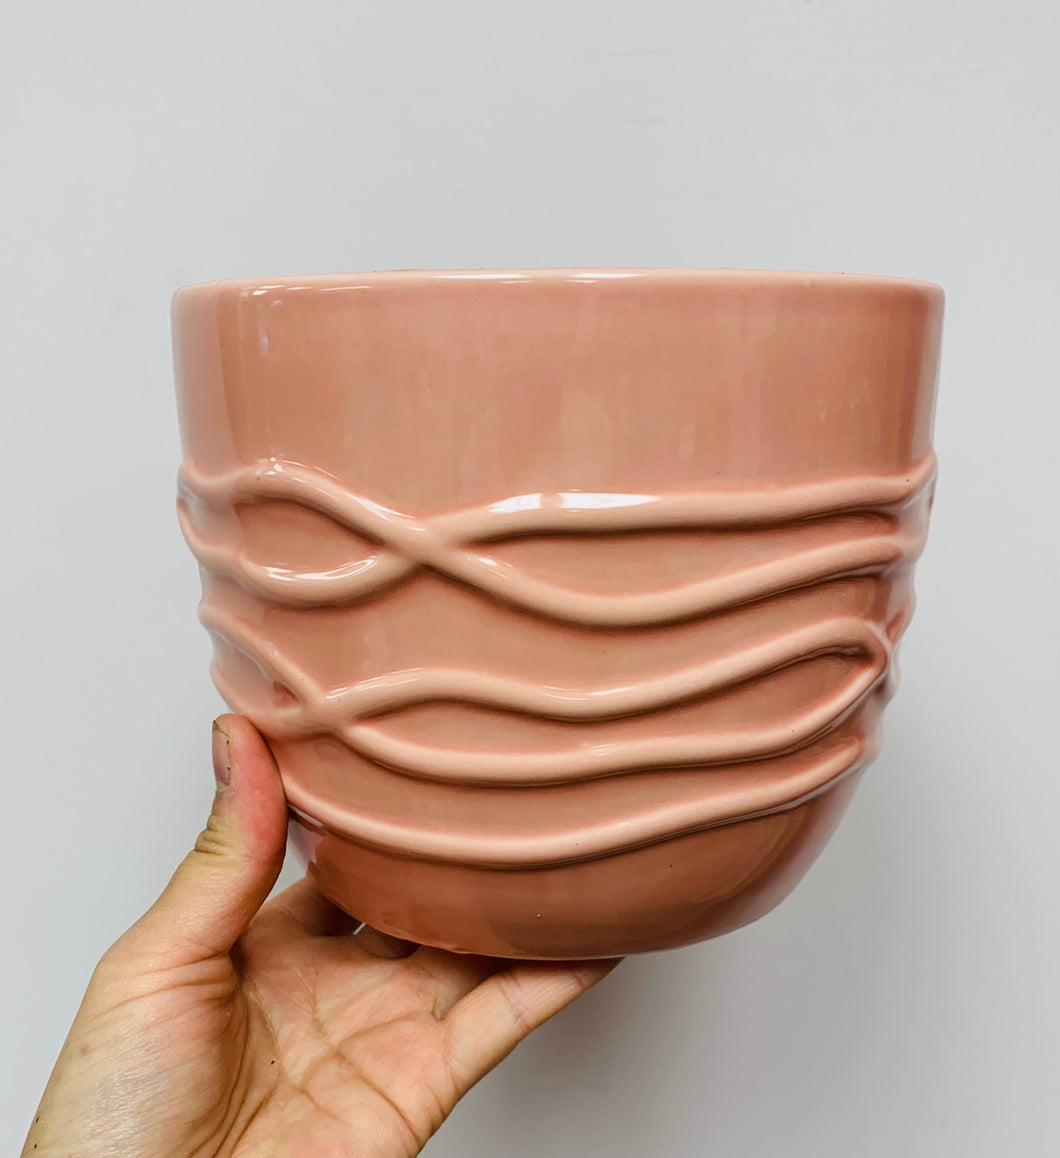 ROSLYN Ceramic Cover Pot (6.5”x5.5”) available in ROSEY PEACH & WHITE